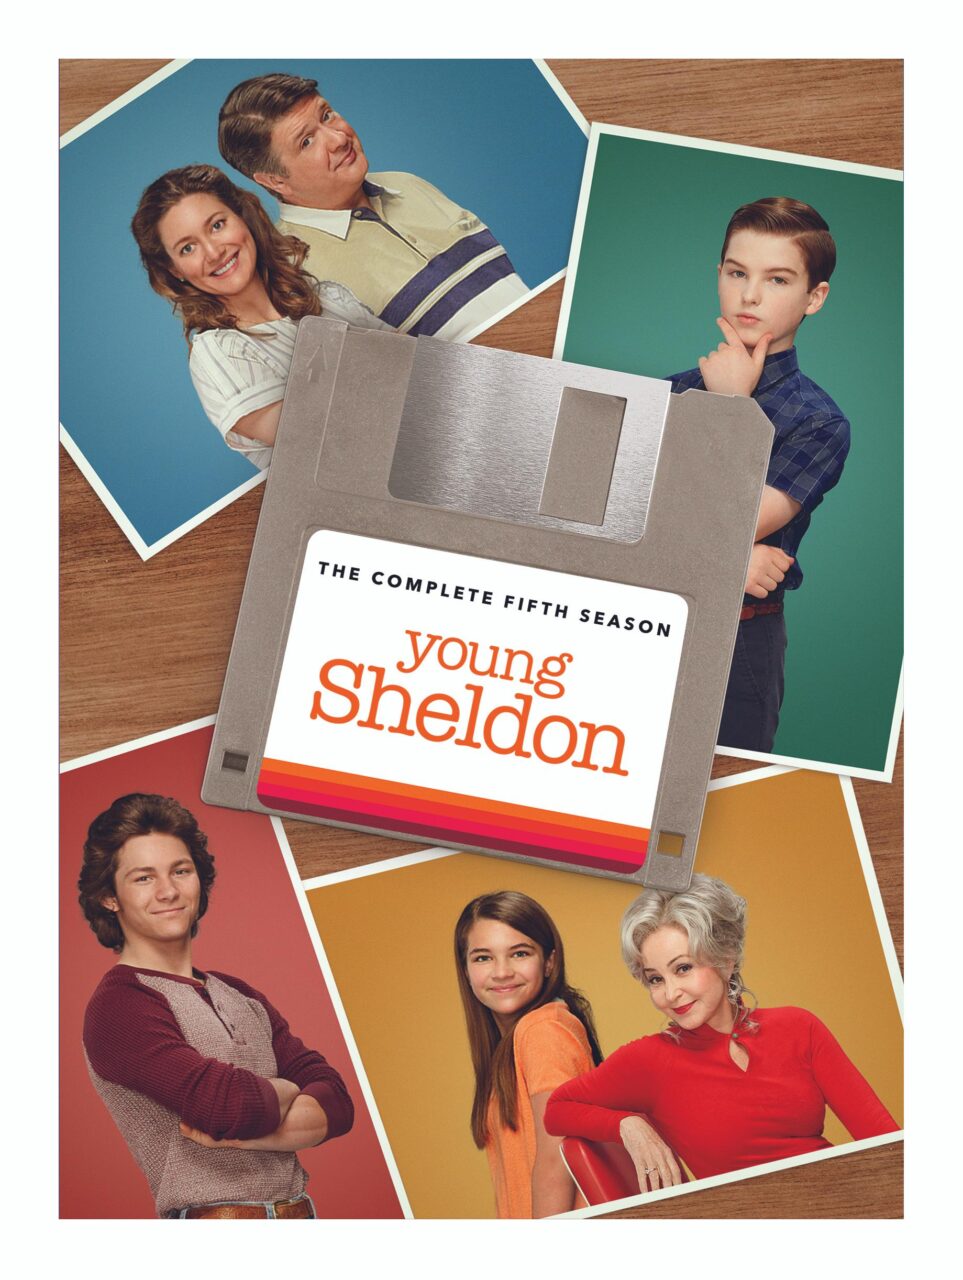 Young Sheldon: The Complete Fifth Season DVD cover (Warner Bros. Home Entertainment)